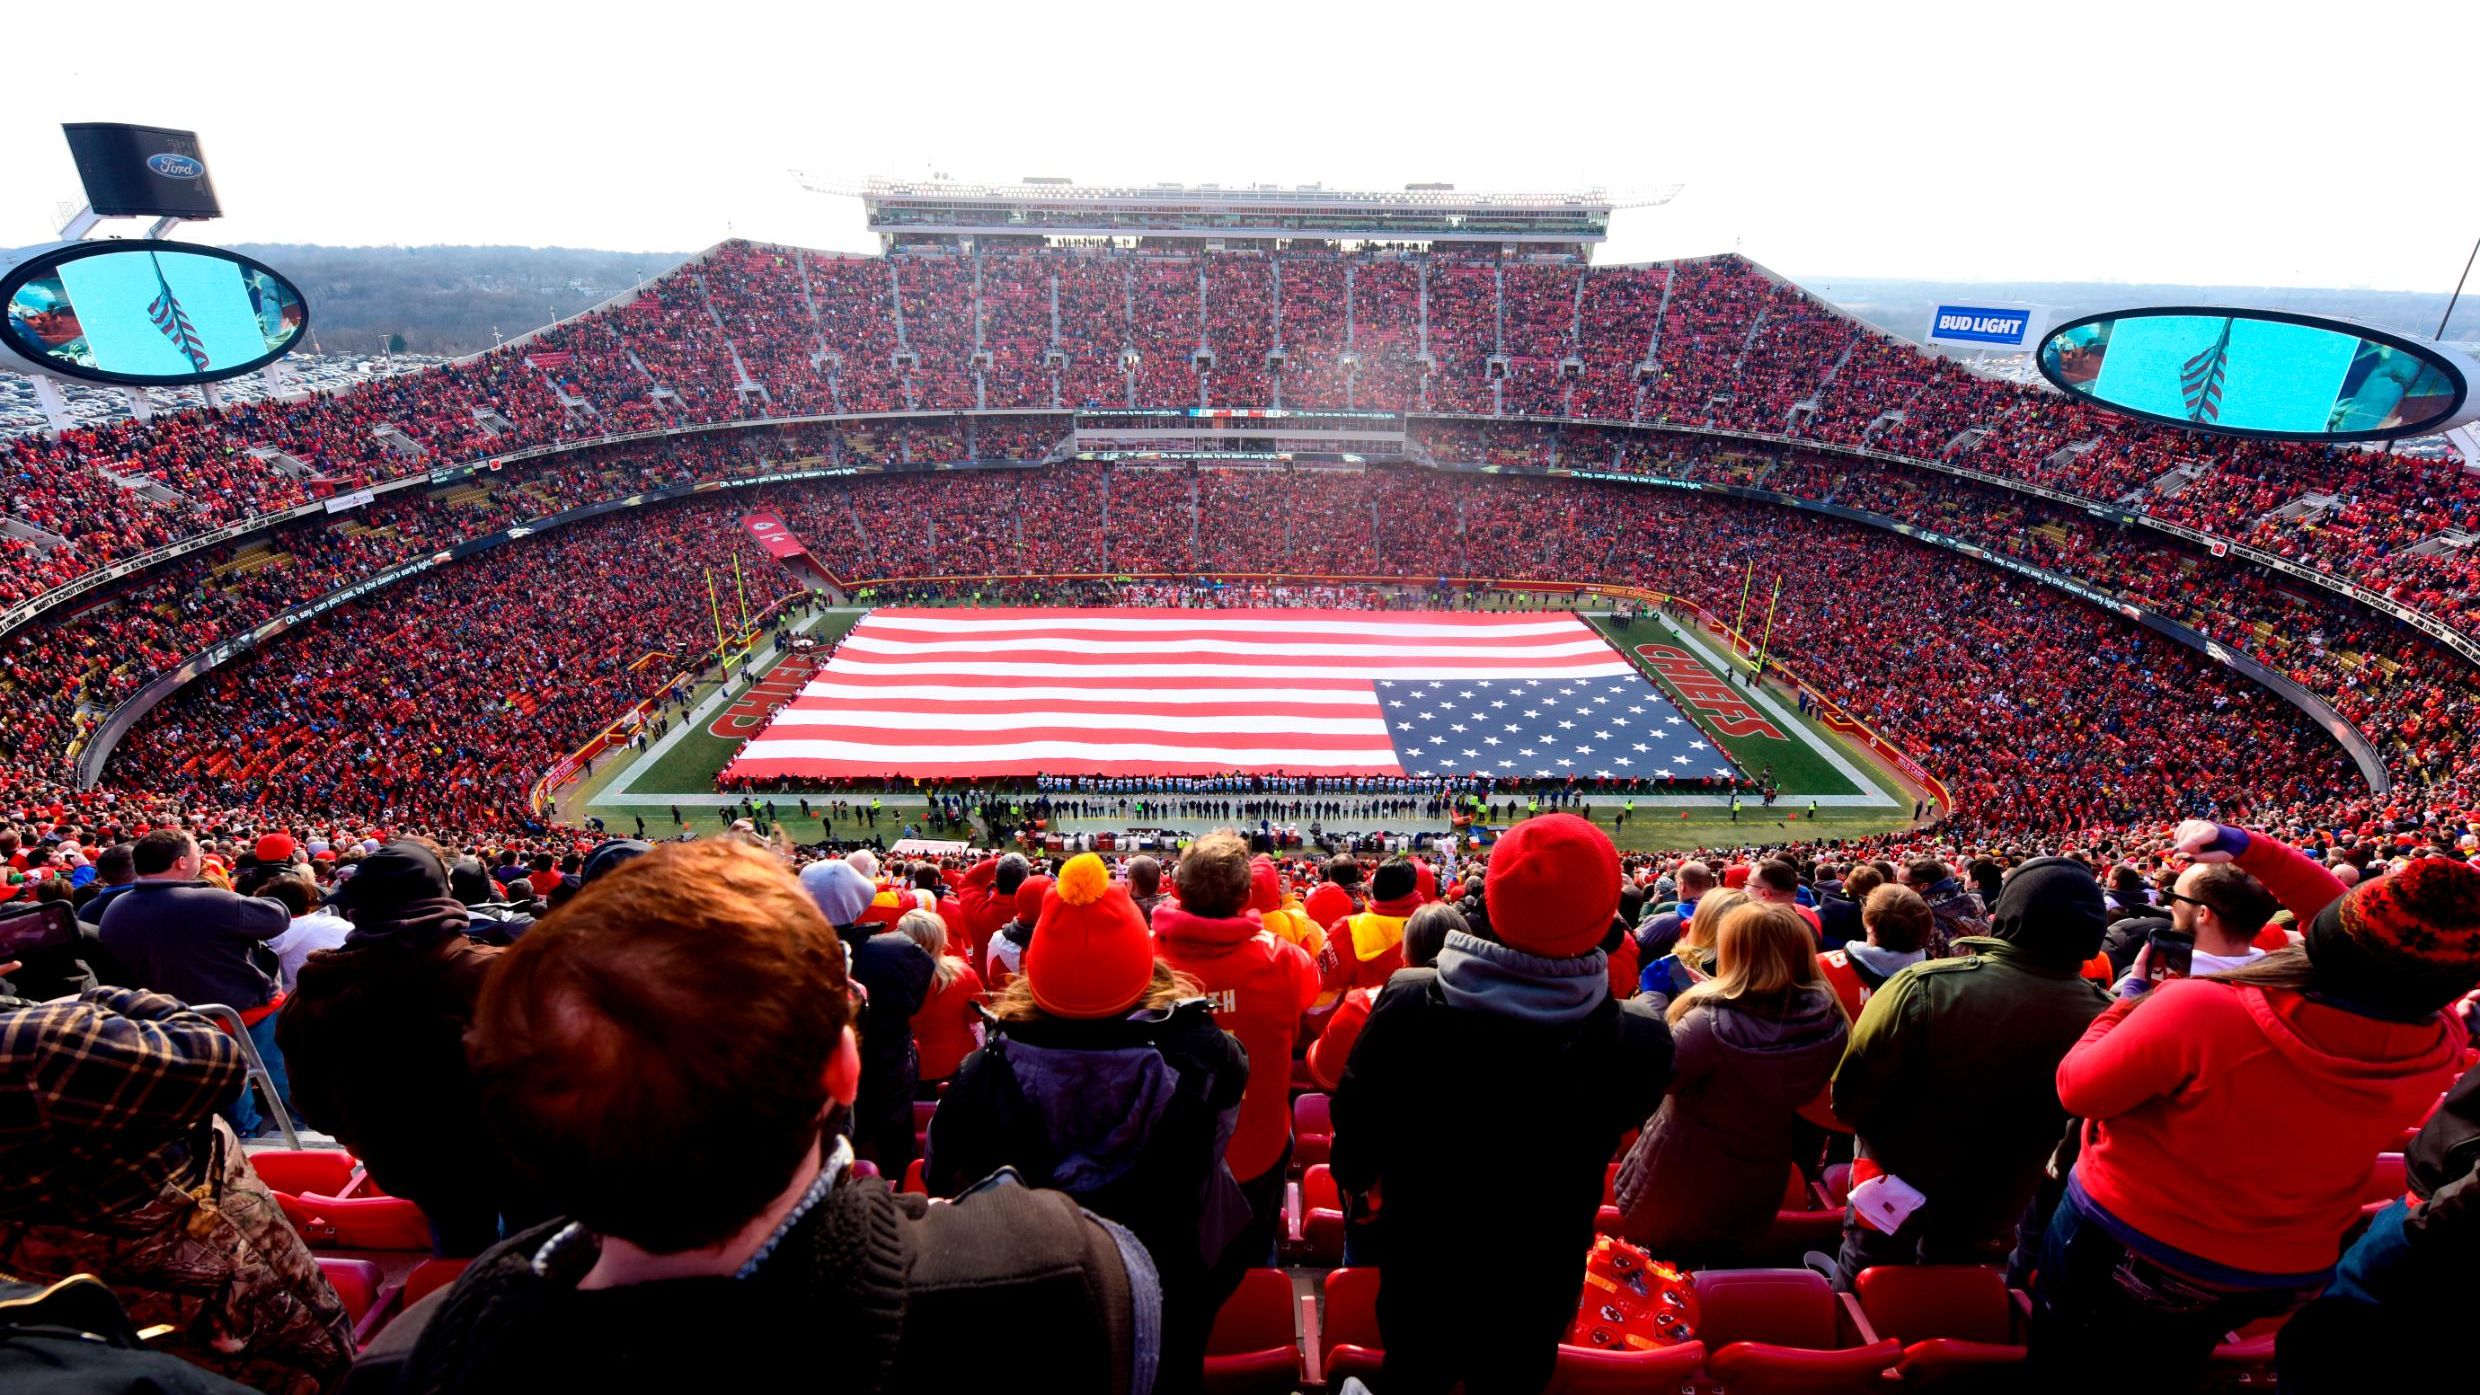 Fans stand at attention for the national anthem overlooking a 100 yard American flag prior the AFC Wild Card Playoff Game between the Kansas City Chiefs and the Tennessee Titans at Arrowhead Stadium on January 6, 2018 in Kansas City, Missouri.